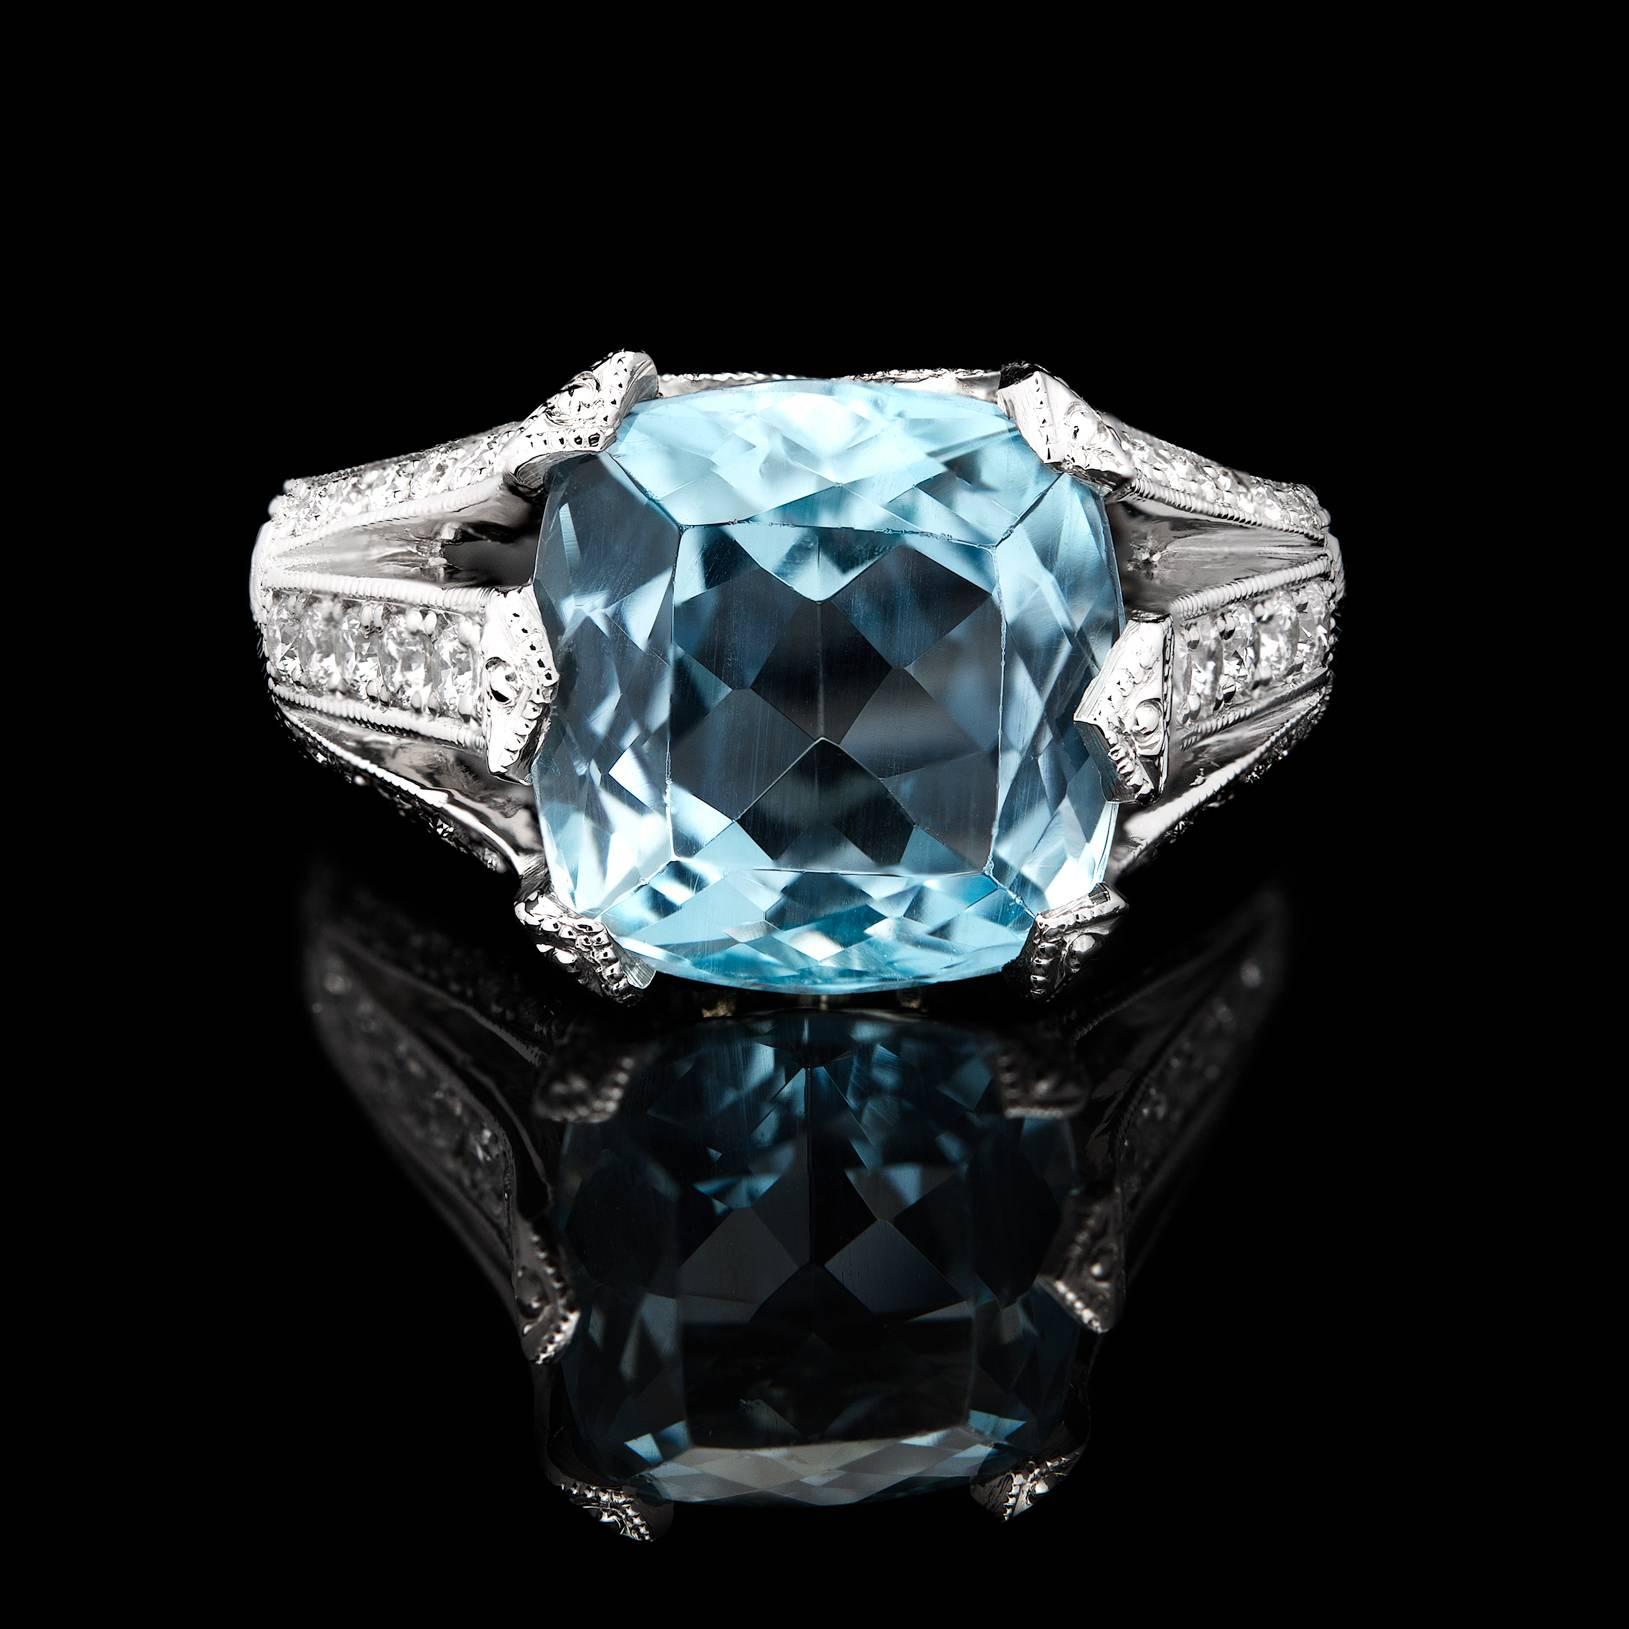 Purchased from the estate of a collector from California's central coast, this gorgeous Platinum ring features one 4.55 carat faceted Aquamarine set among 40 sparkling round cut diamonds for approximately 0.41cttw. The split shank ring is currently